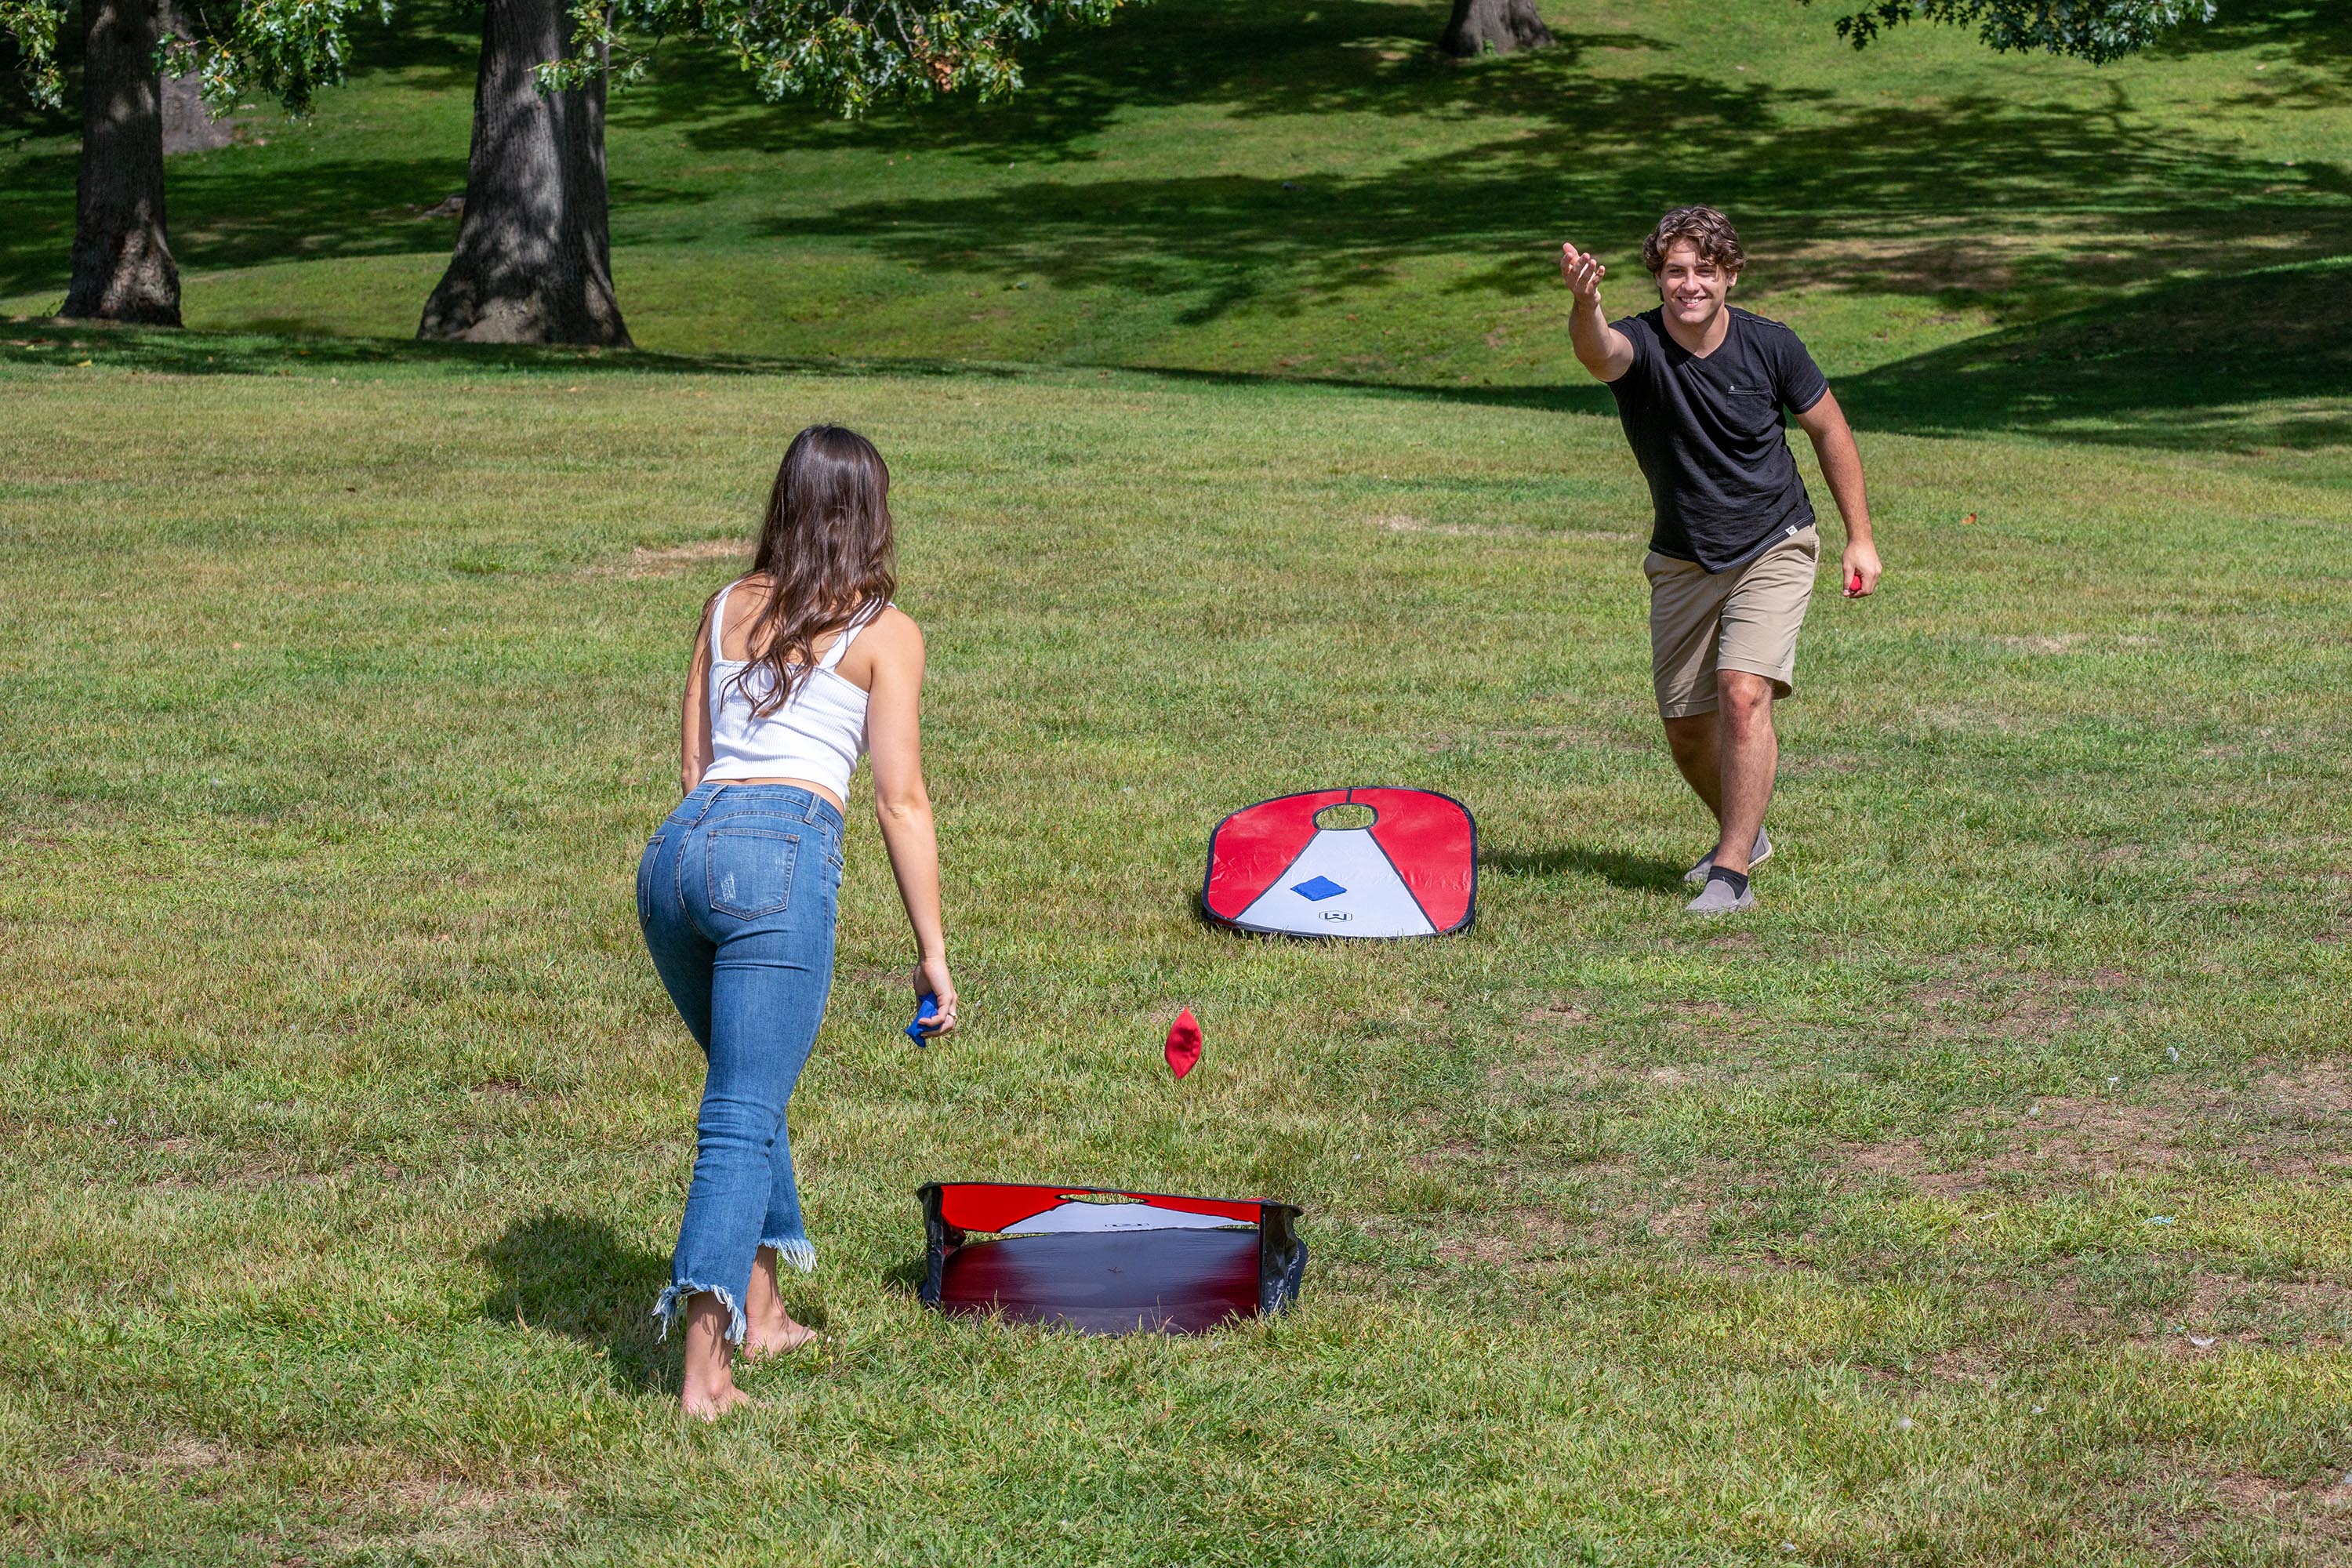 Wicked Big Sports 3ft x 2ft Collapsible Vinyl Cornhole Outdoor Lawn Game - image 3 of 8